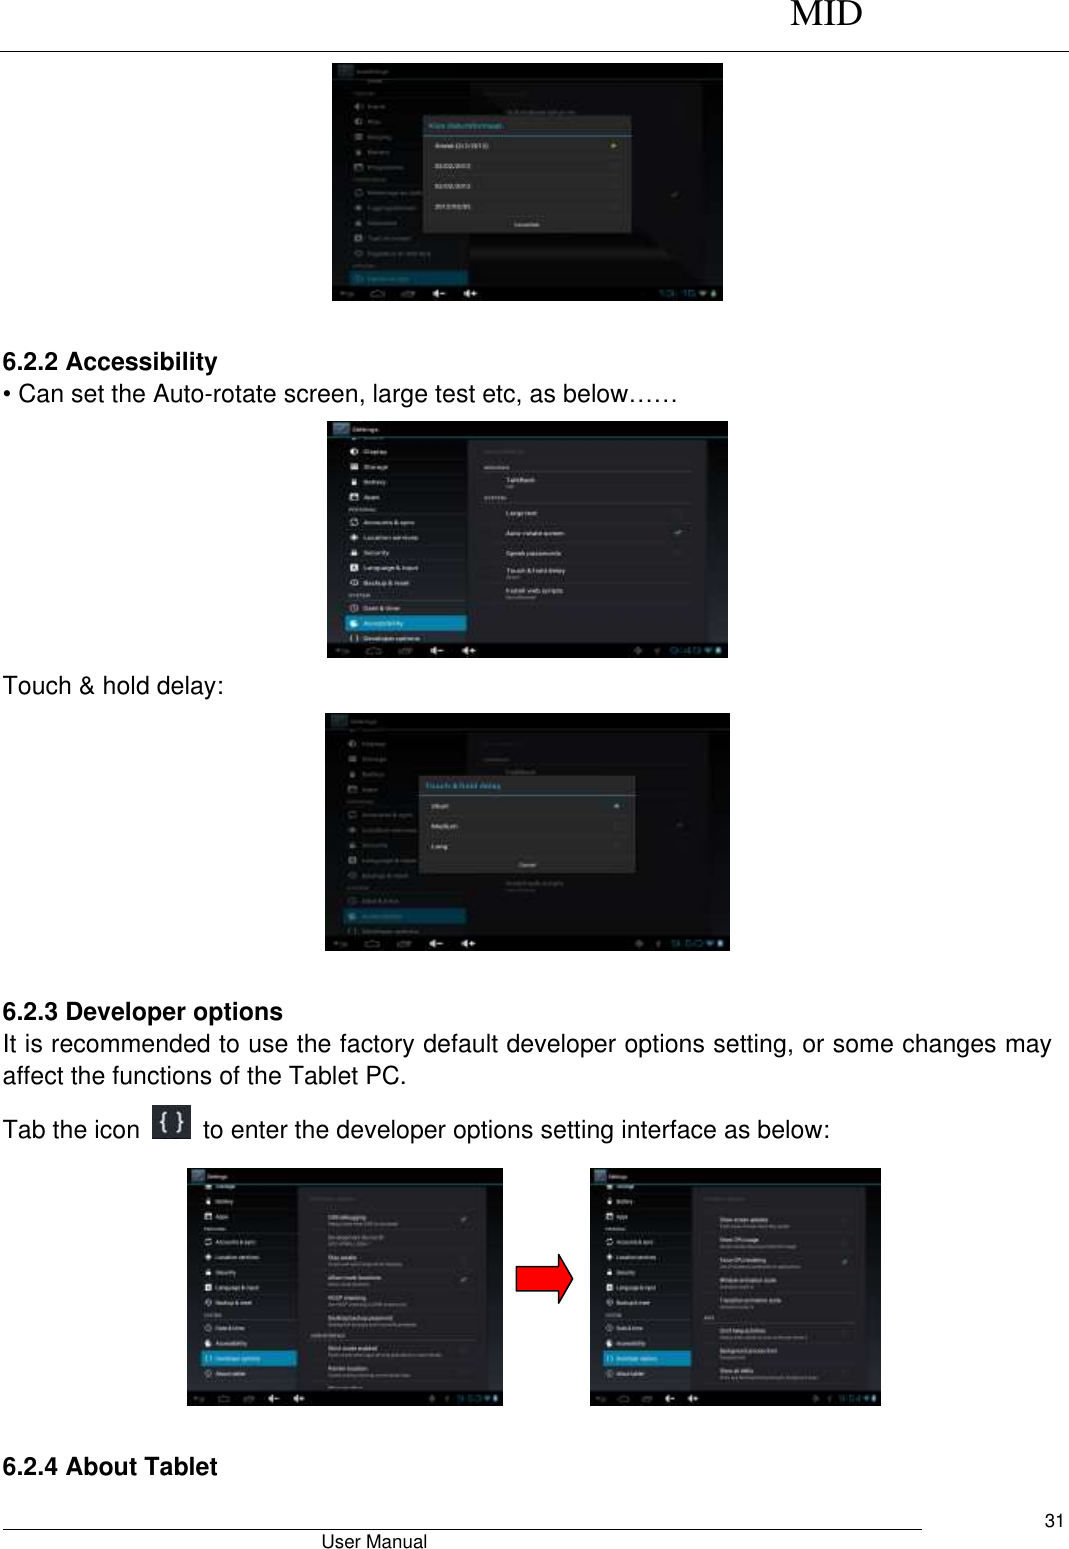      MID                                        User Manual     31   6.2.2 Accessibility • Can set the Auto-rotate screen, large test etc, as below……  Touch &amp; hold delay:   6.2.3 Developer options It is recommended to use the factory default developer options setting, or some changes may affect the functions of the Tablet PC. Tab the icon    to enter the developer options setting interface as below:           6.2.4 About Tablet 